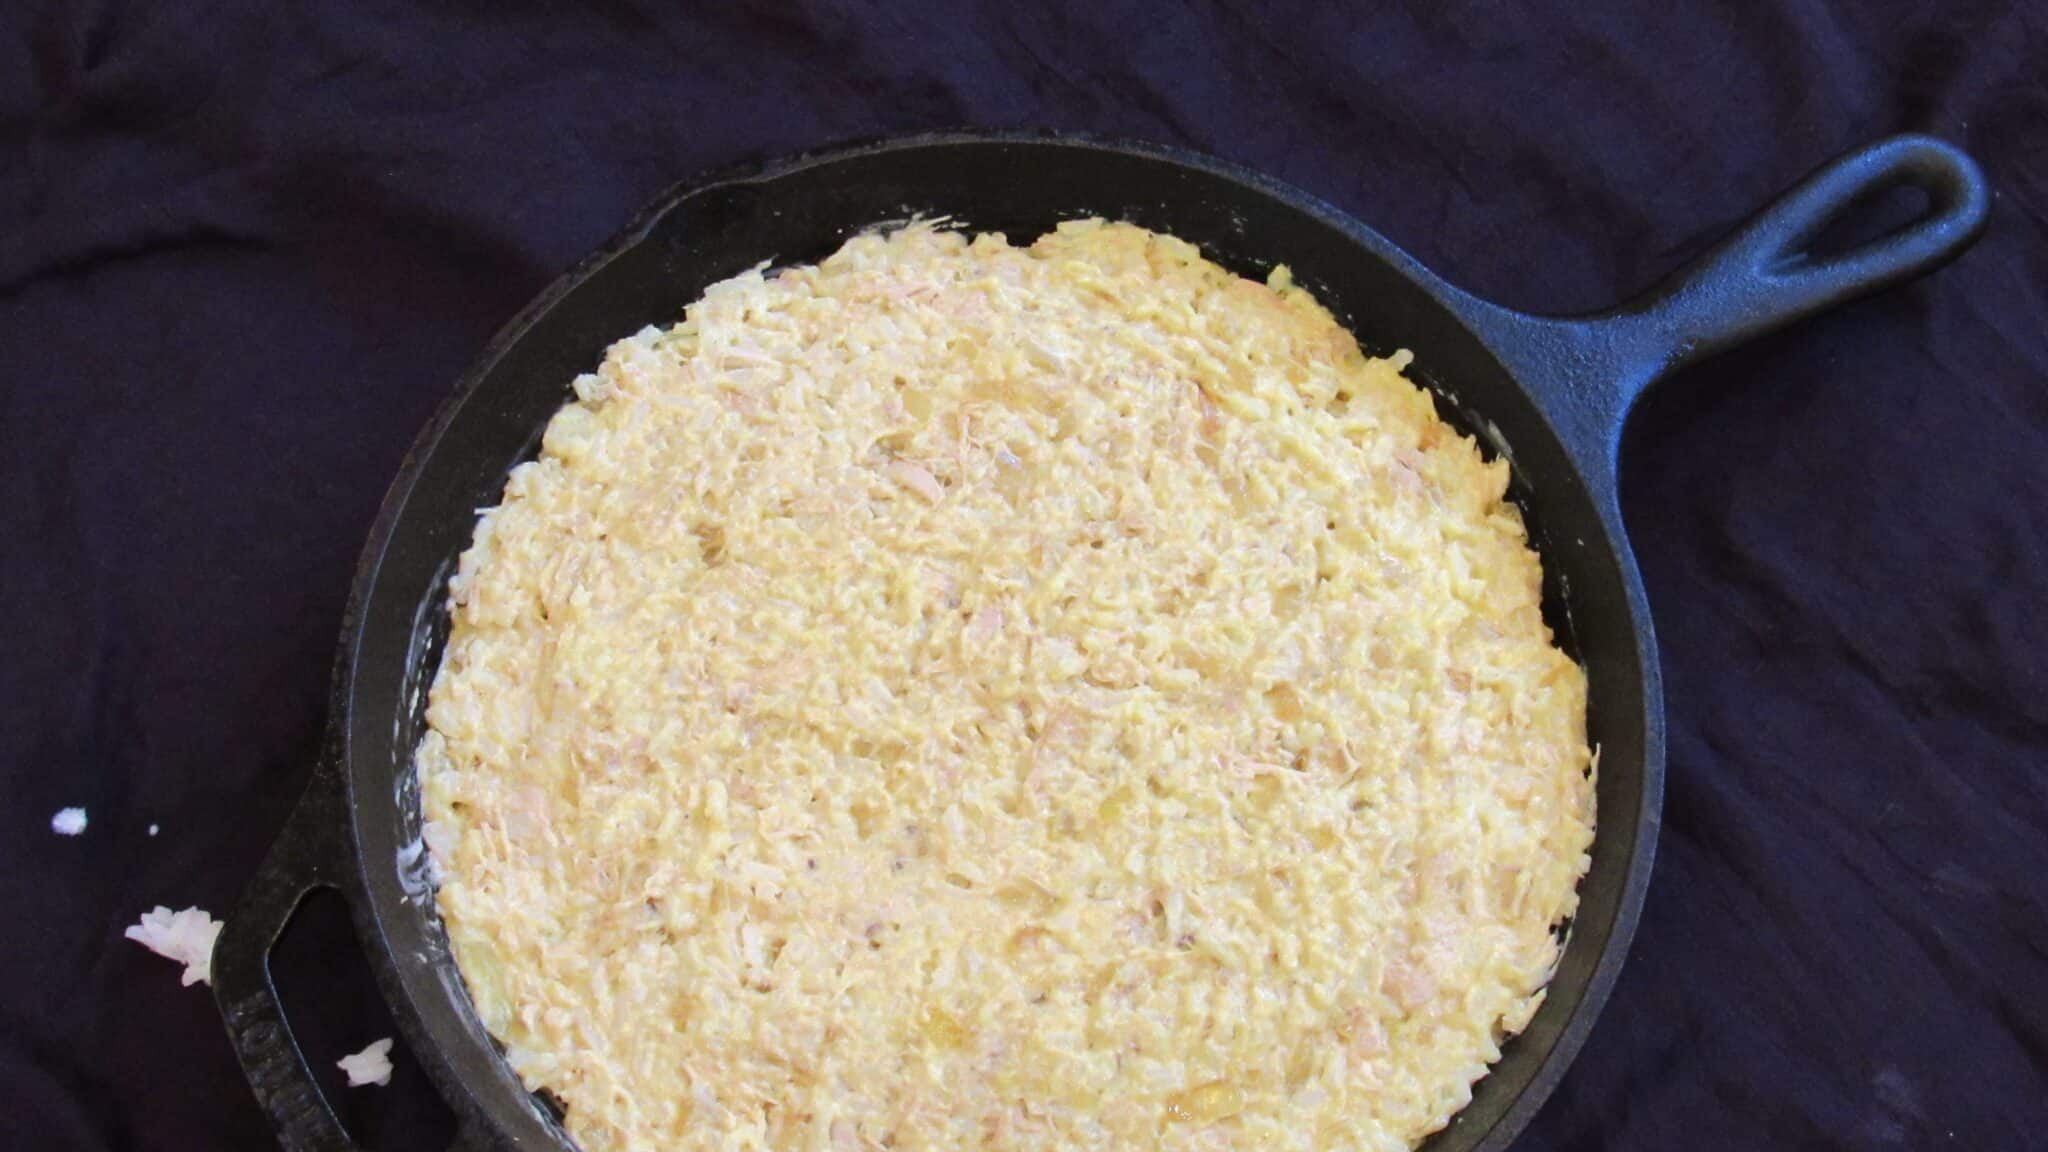 Chicken and rice casserole prepared in a cast-iron skillet and ready to bake.